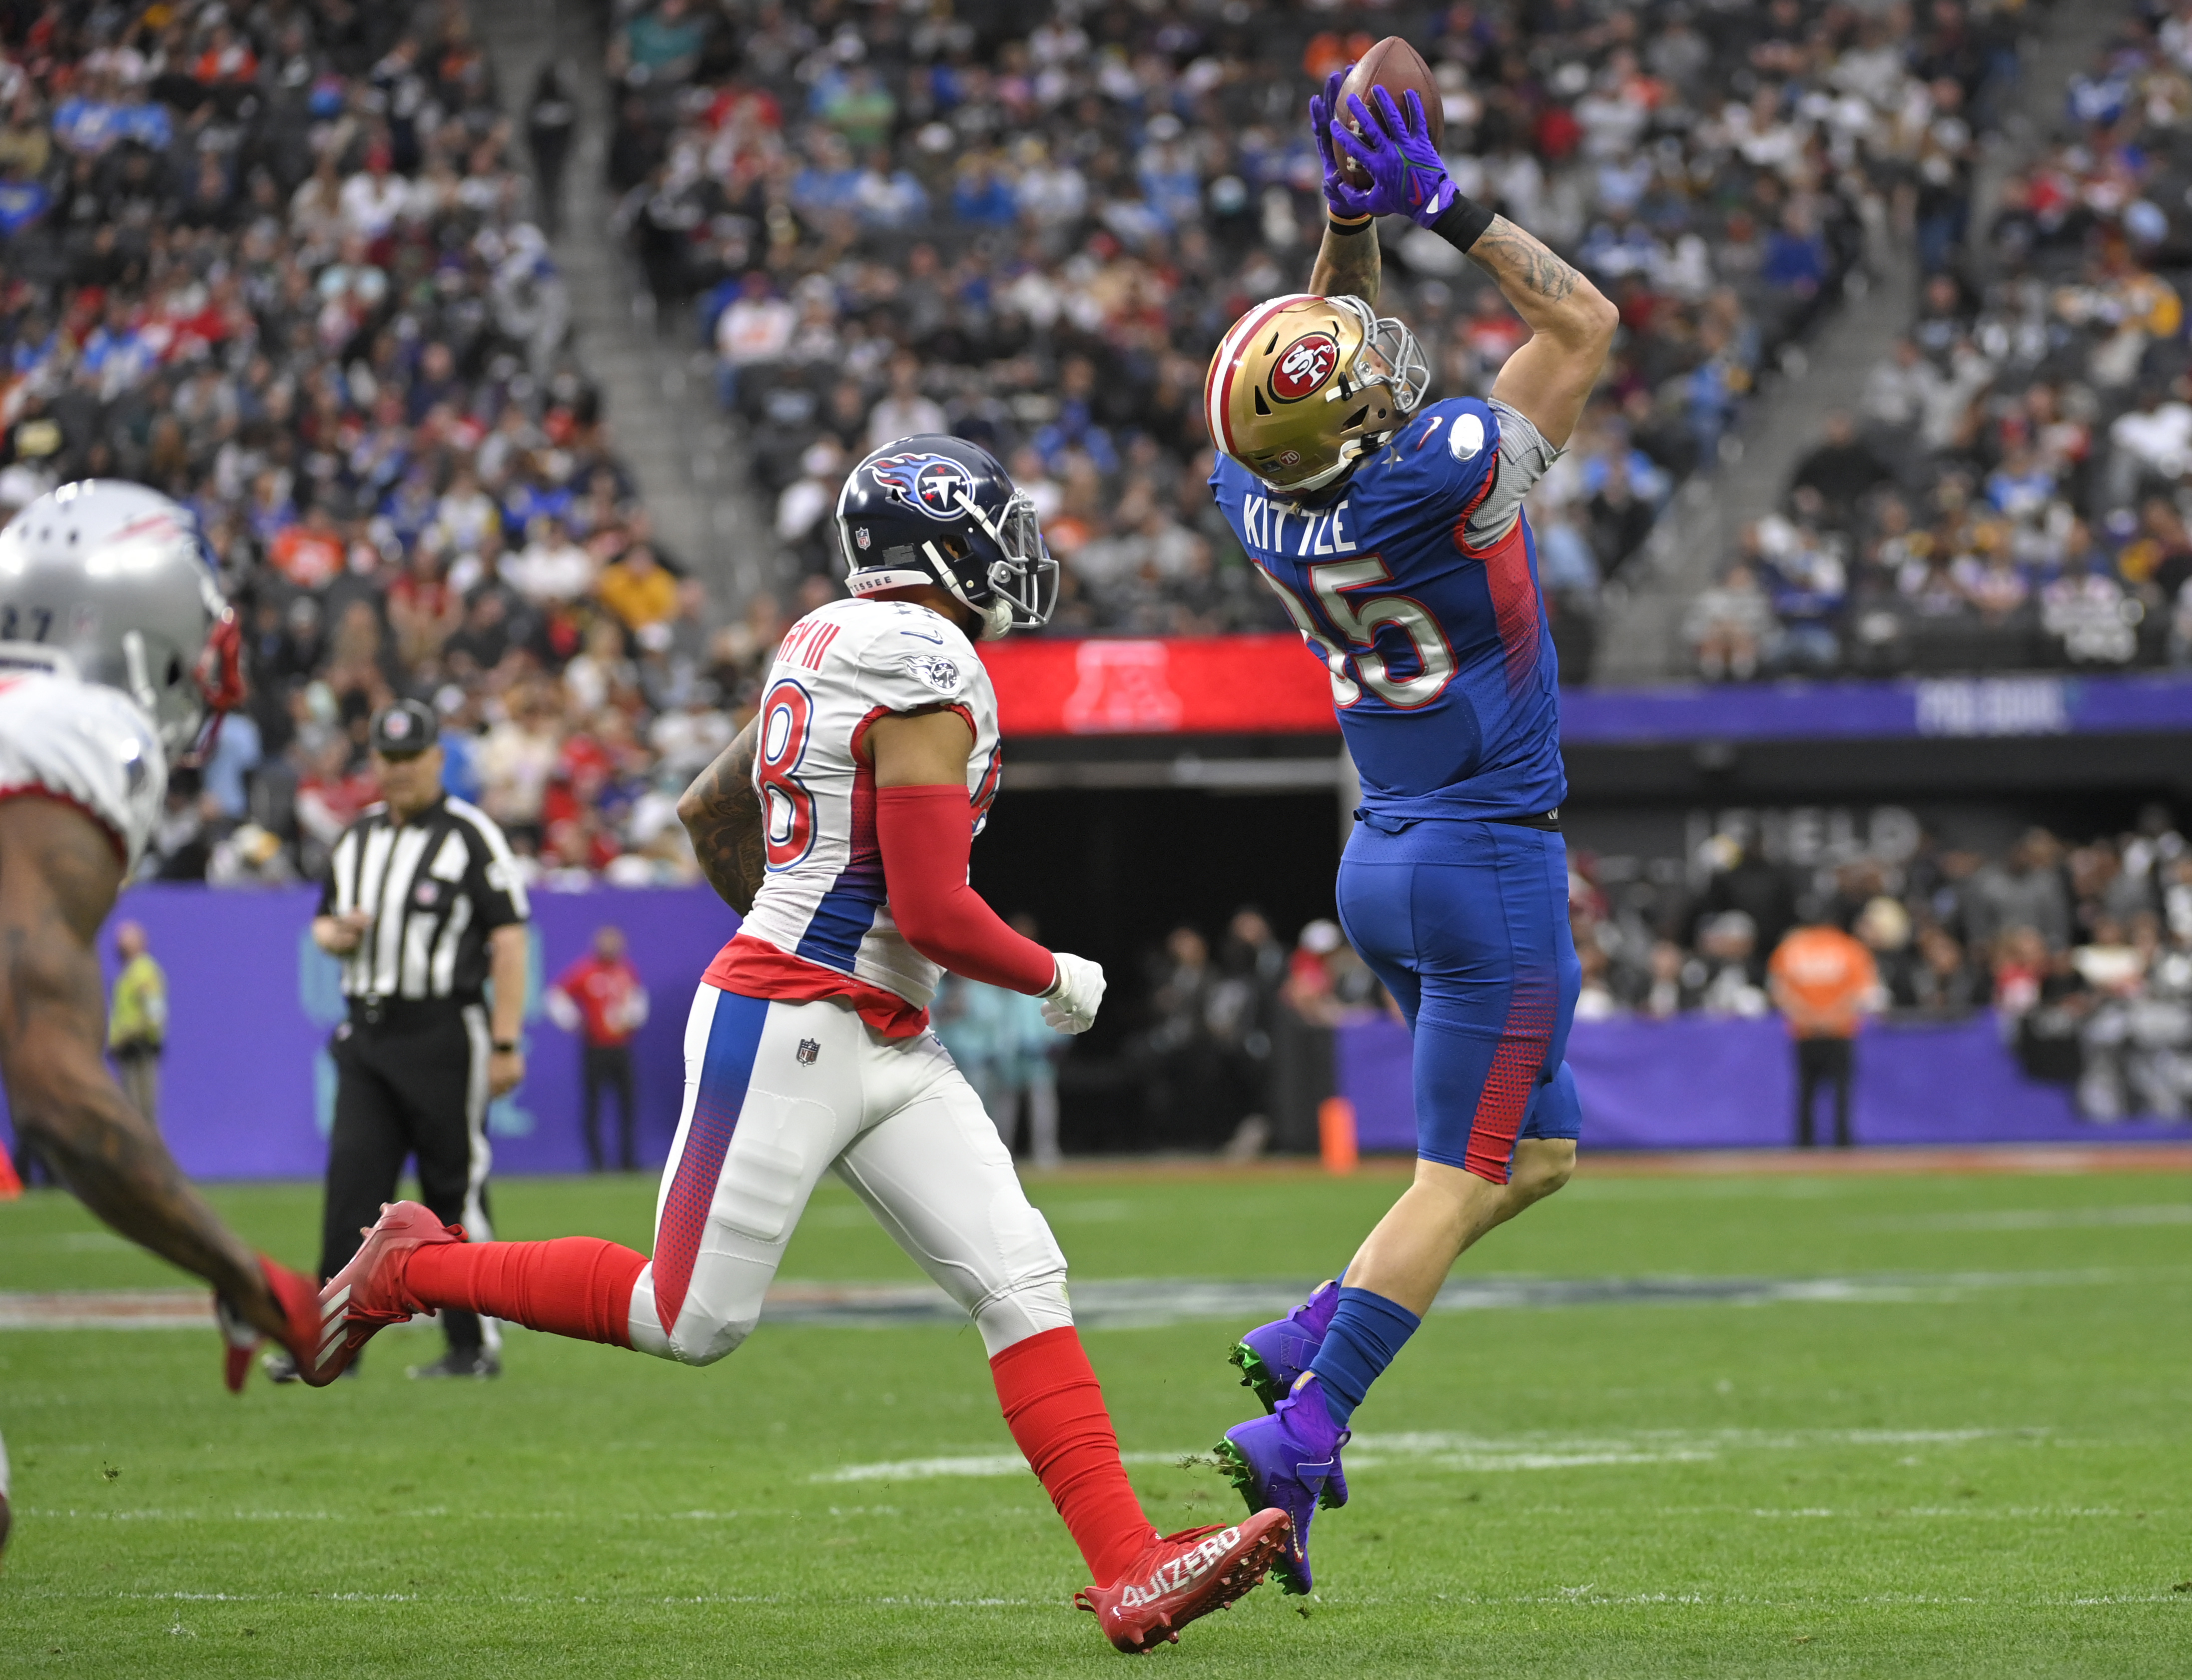 Pro Bowl to be replaced by skills competition and flag football